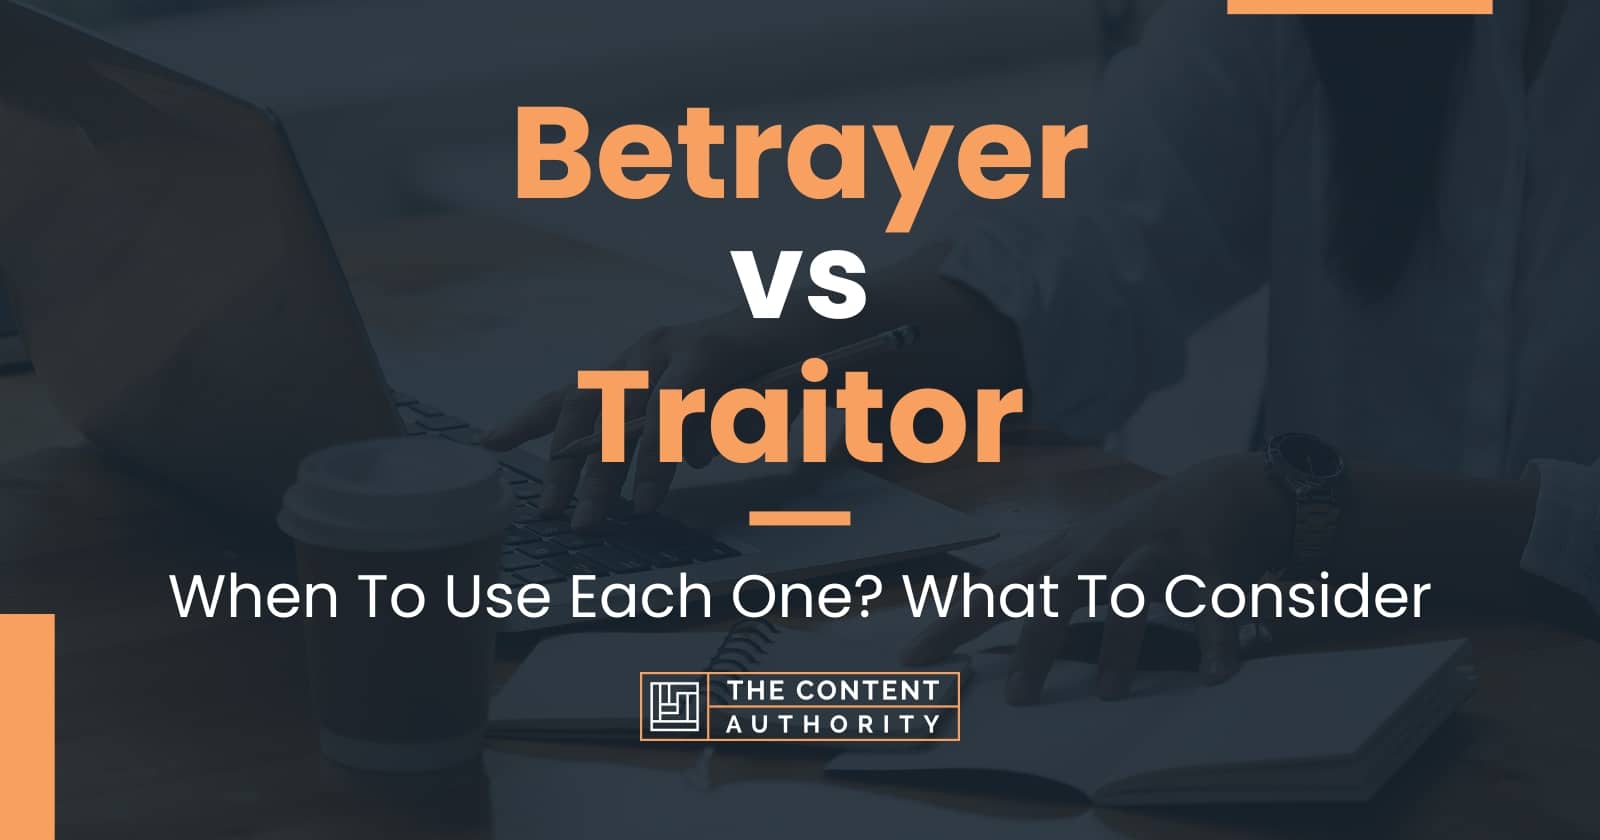 Words Betrayer and Traitor have similar meaning